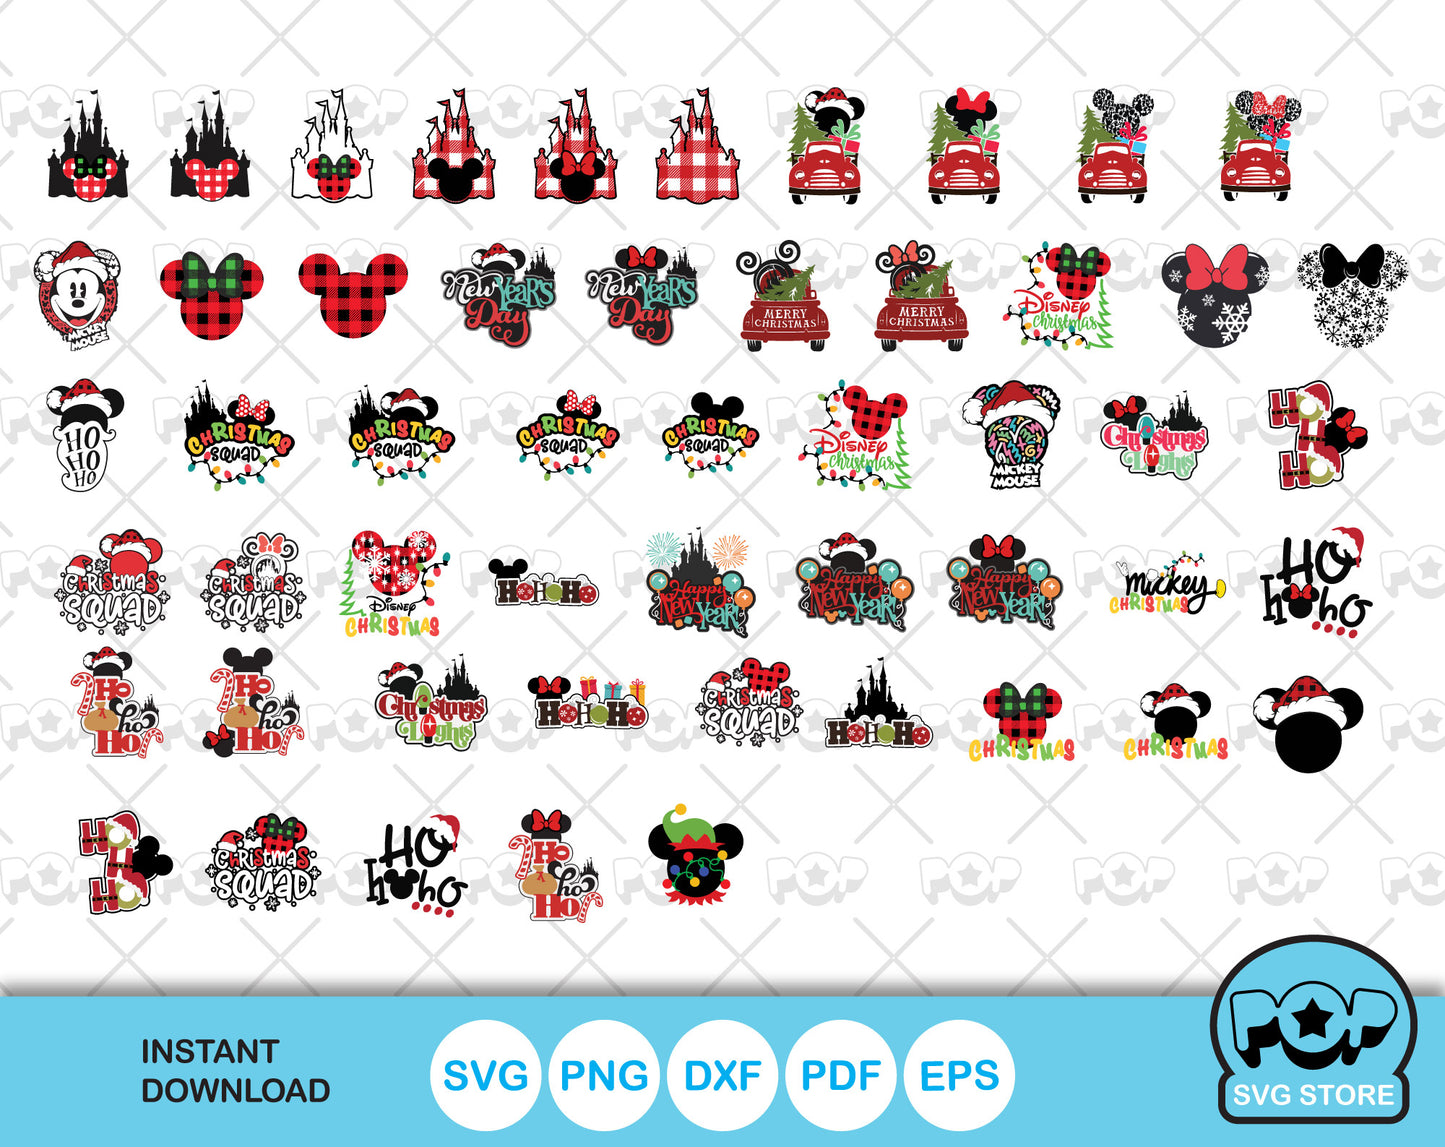 Disney Christmas 100+ cliparts bundle, Mickey and Friends Christmas cliparts, SVG cut files for cricut silhouette, SVG, PNG, DXF, instant download